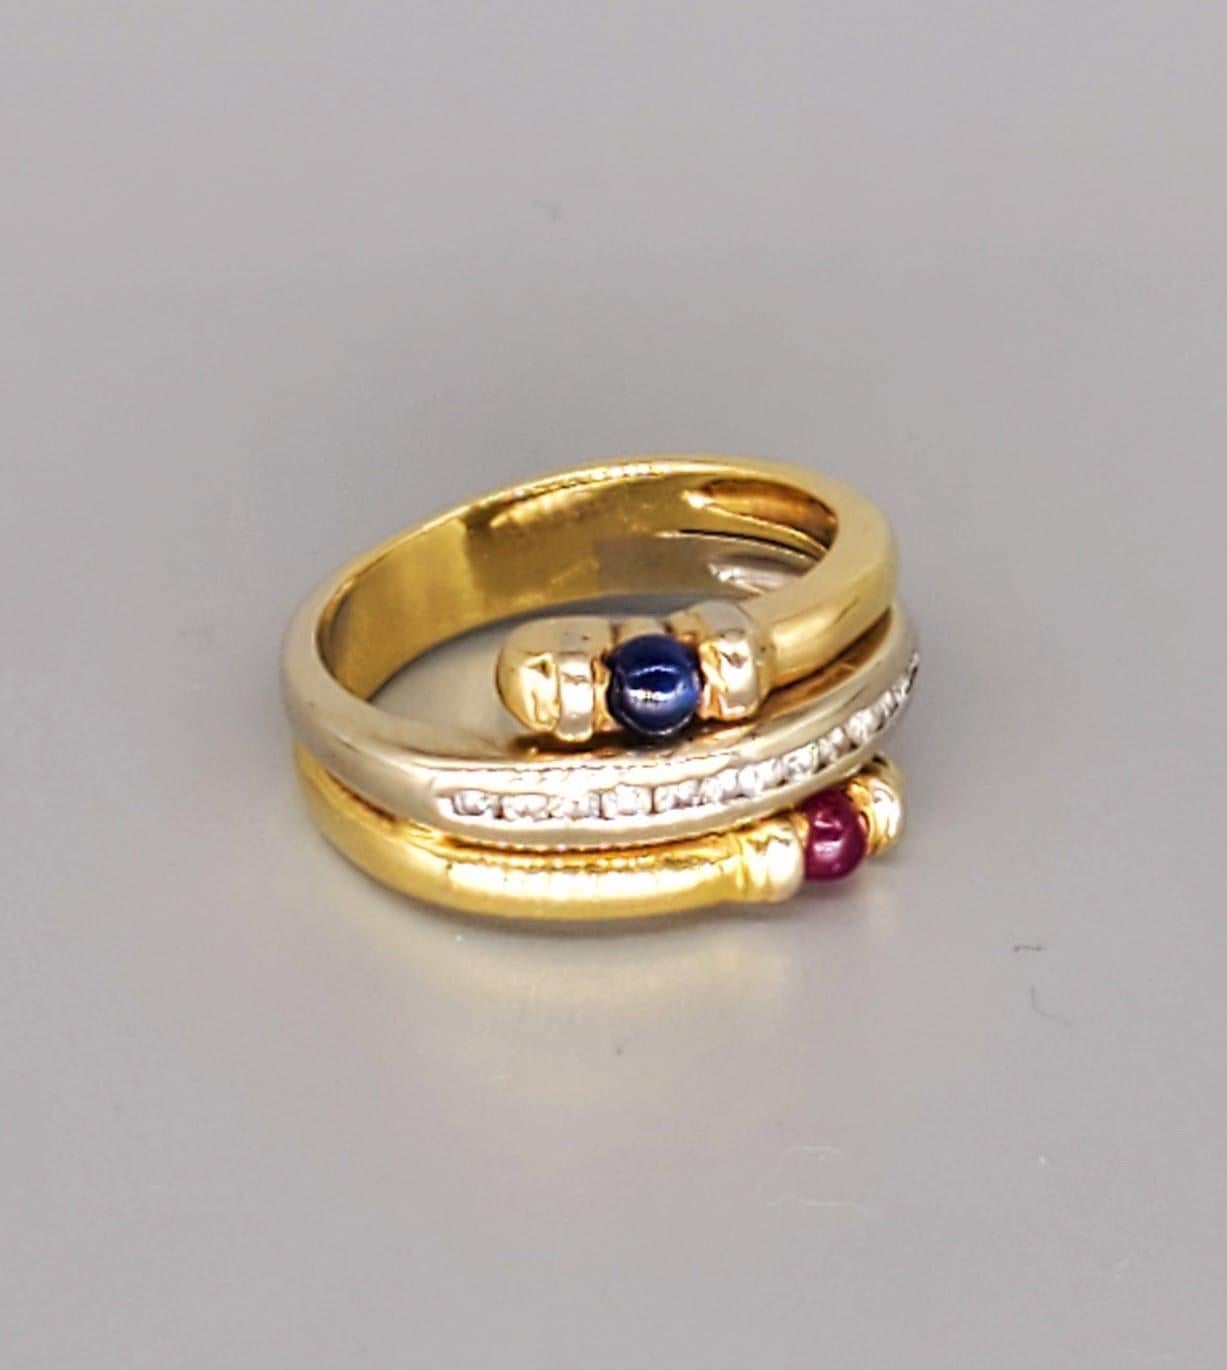 Vintage 0.60 Carats Diamonds & Sapphire Ruby Cabochon Ring. The diamonds weight approx 0.20 carats. The ruby & sapphire cabochon weight approx 0.20 carats each. The ring is made of 18k solid good and is also stamped 750 for purity. The ring is a